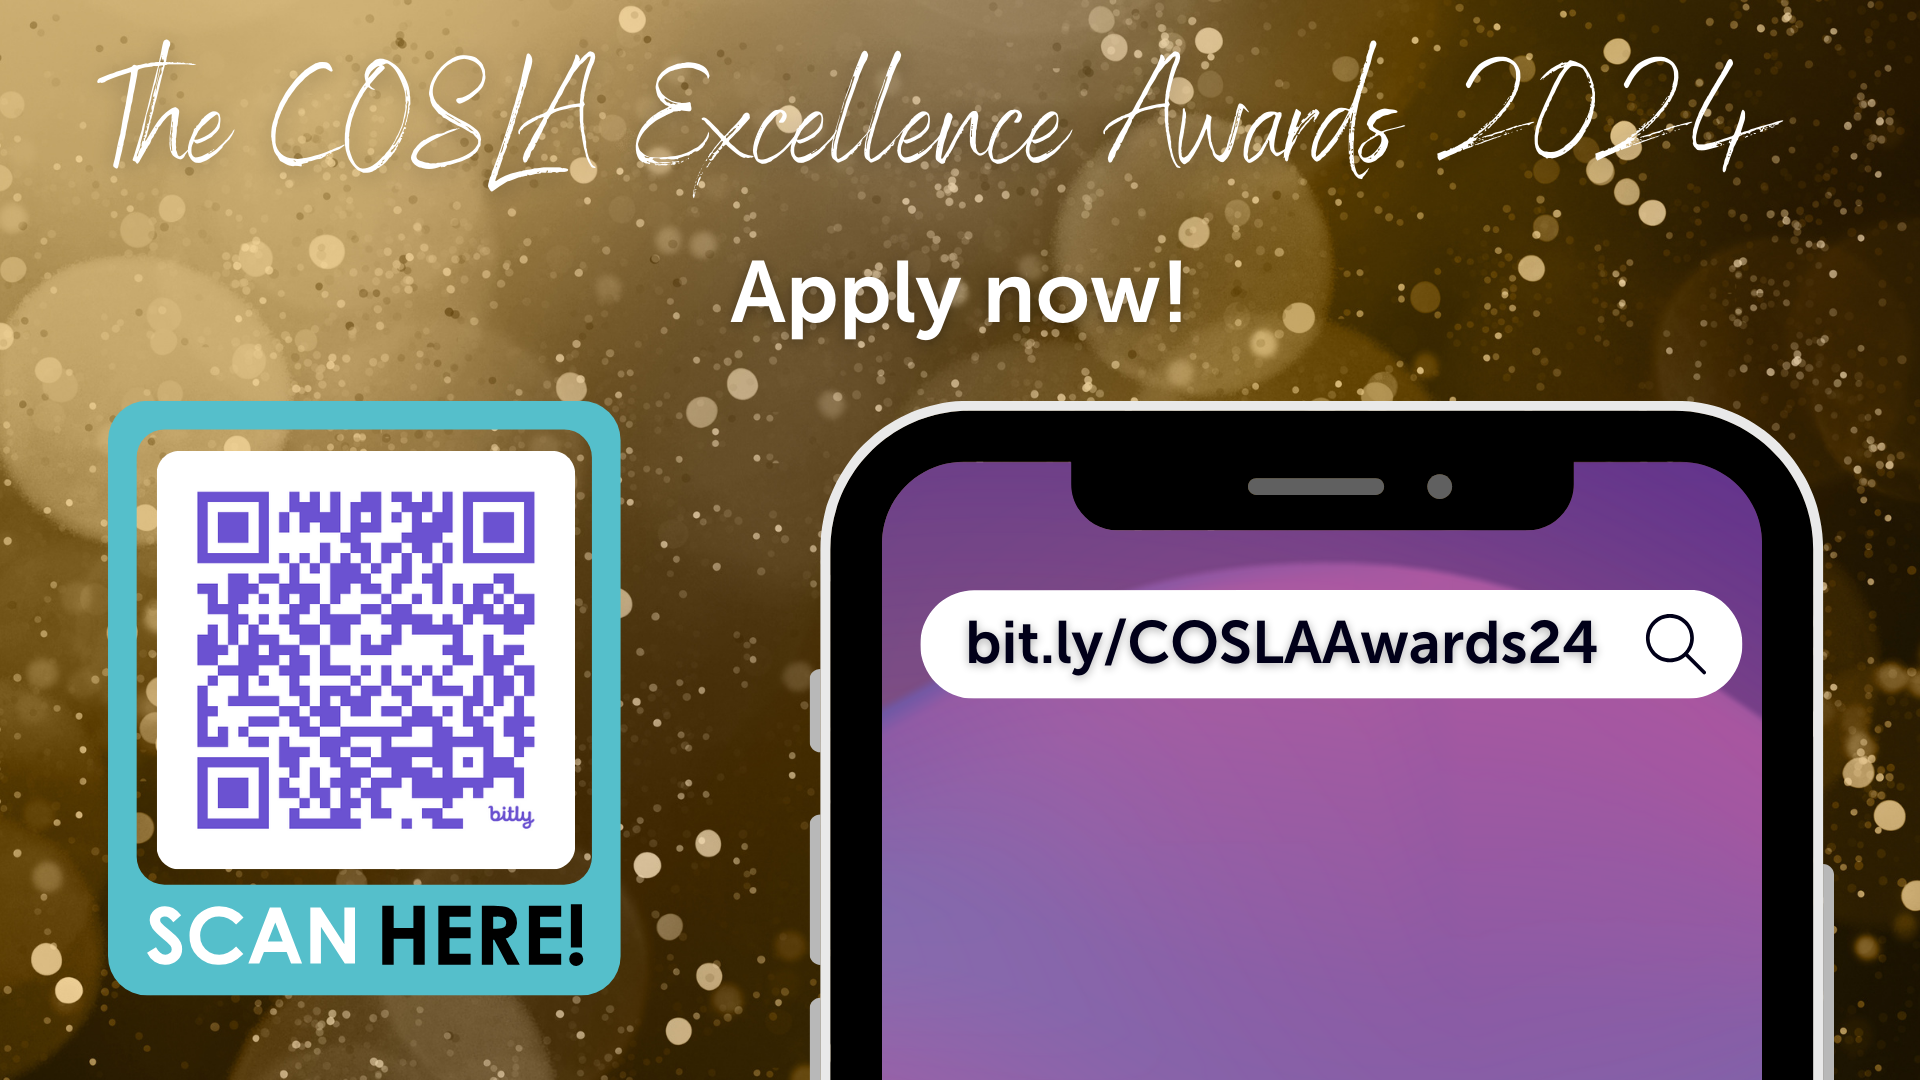 Click here to go to the online application for the 2024 COSLA Excellence Awards